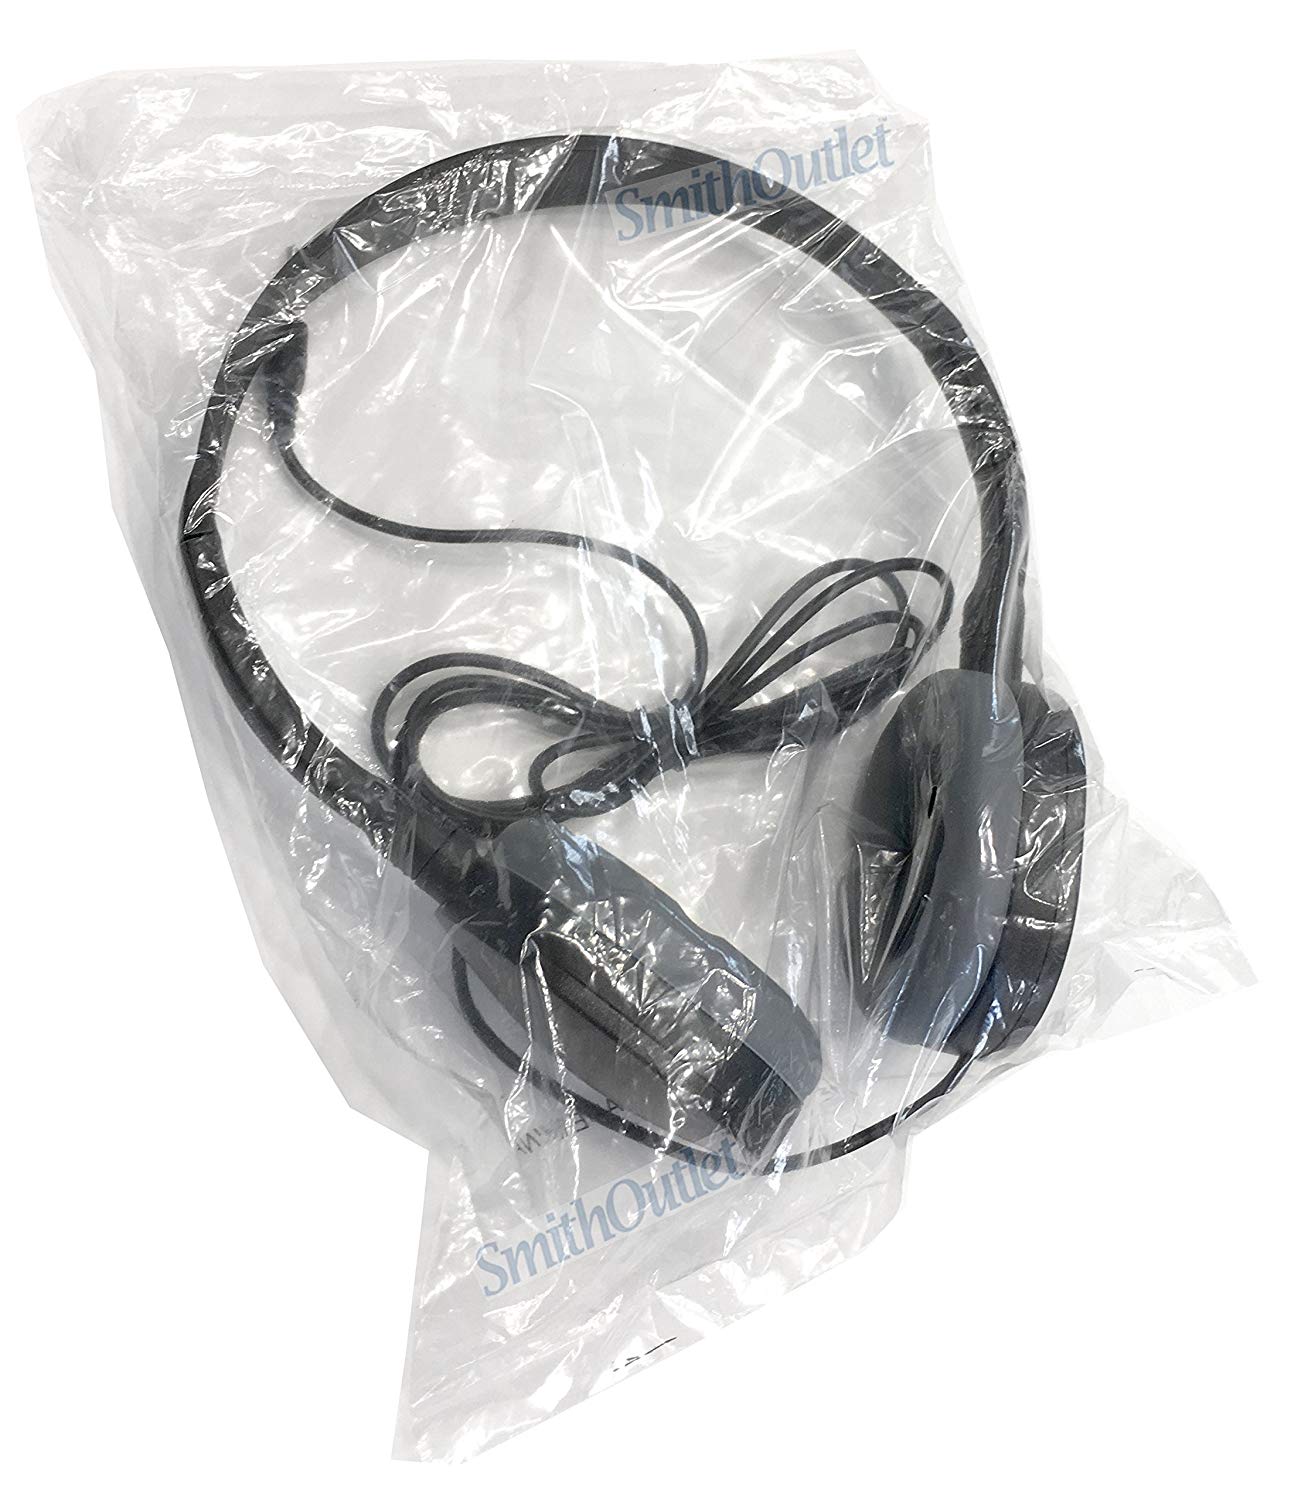 SmithOutlet 50 Pack Rubber Earpad Stereo Headphones in Bulk (Part#: SG-ID55-50)